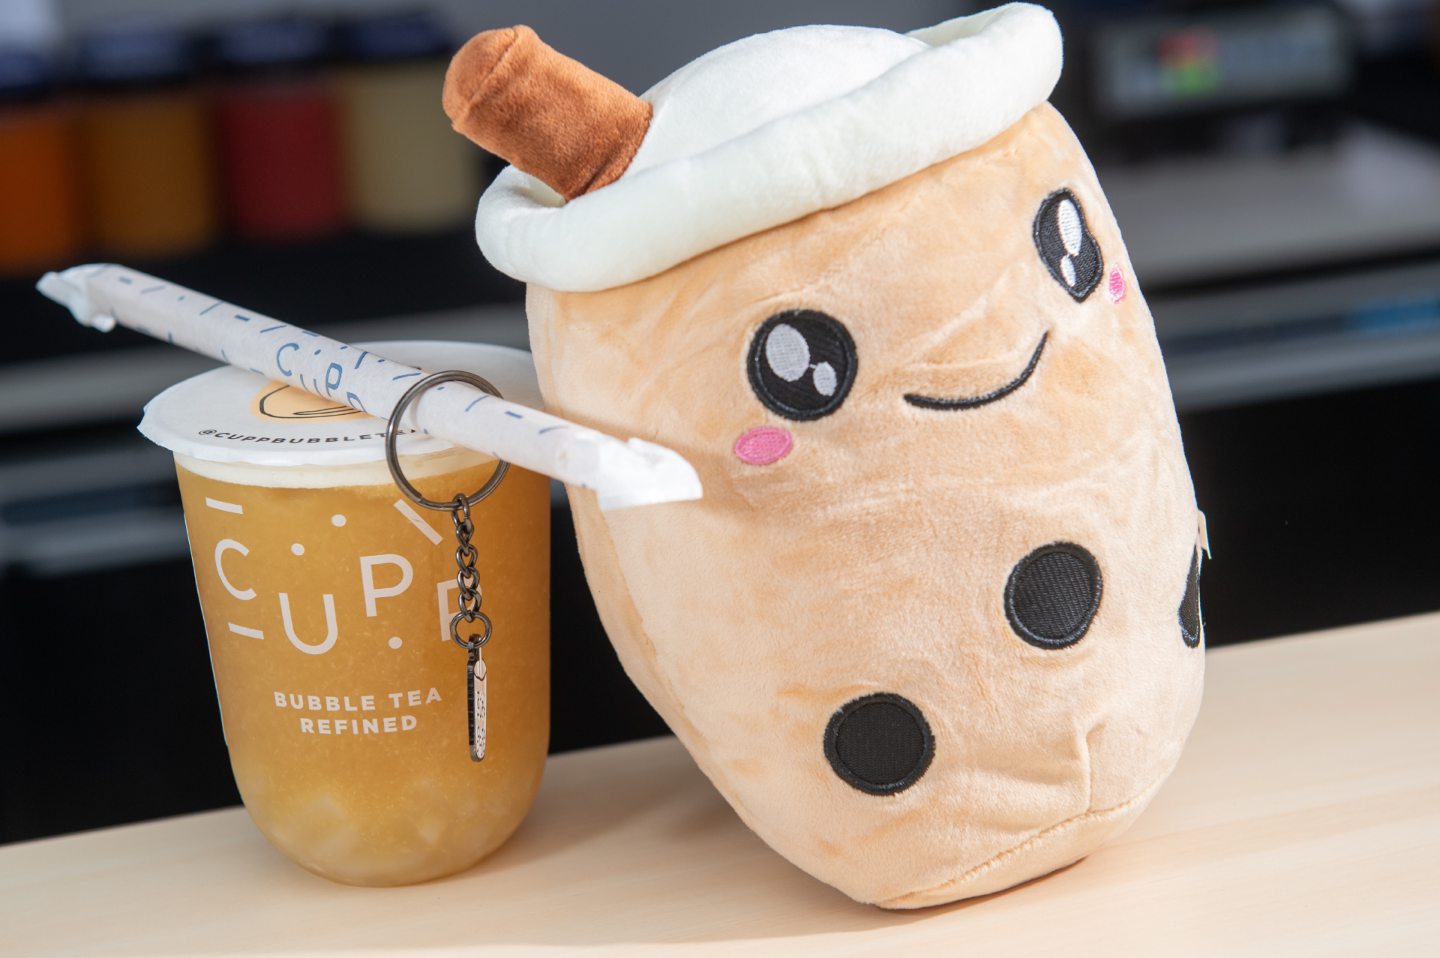 CUPP drink along with a bubble tea plush.